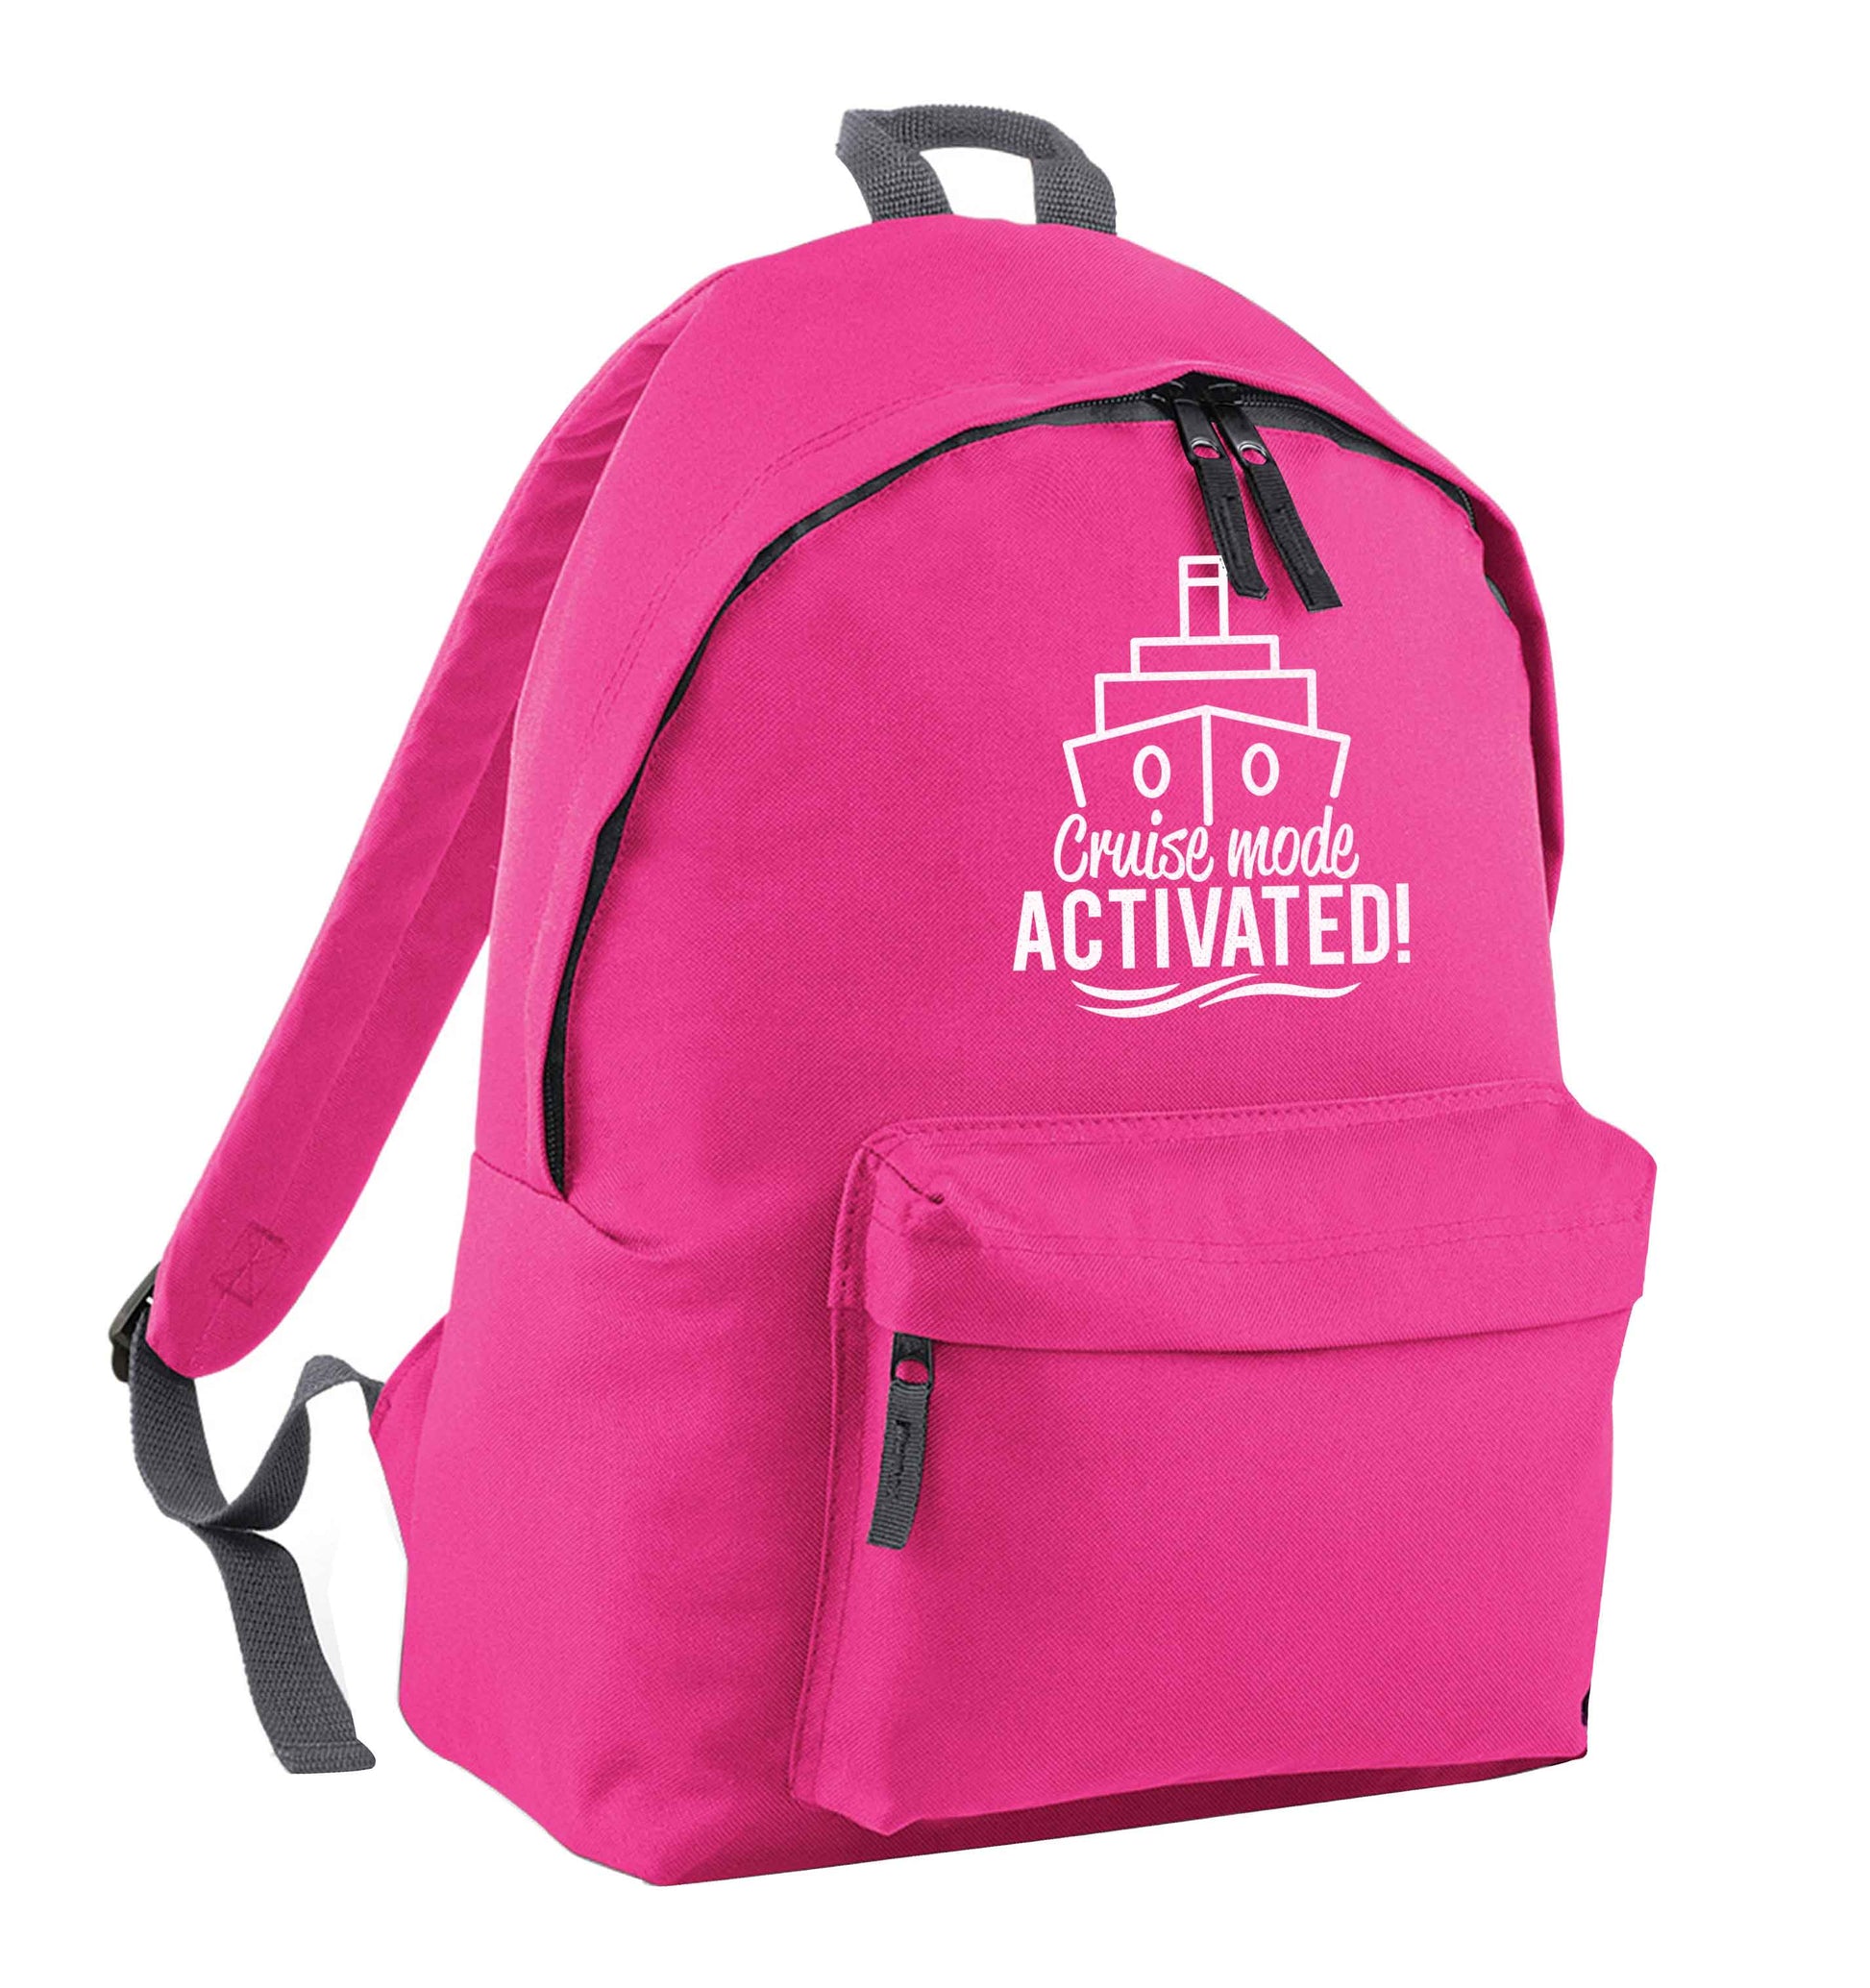 Cruise mode activated pink adults backpack